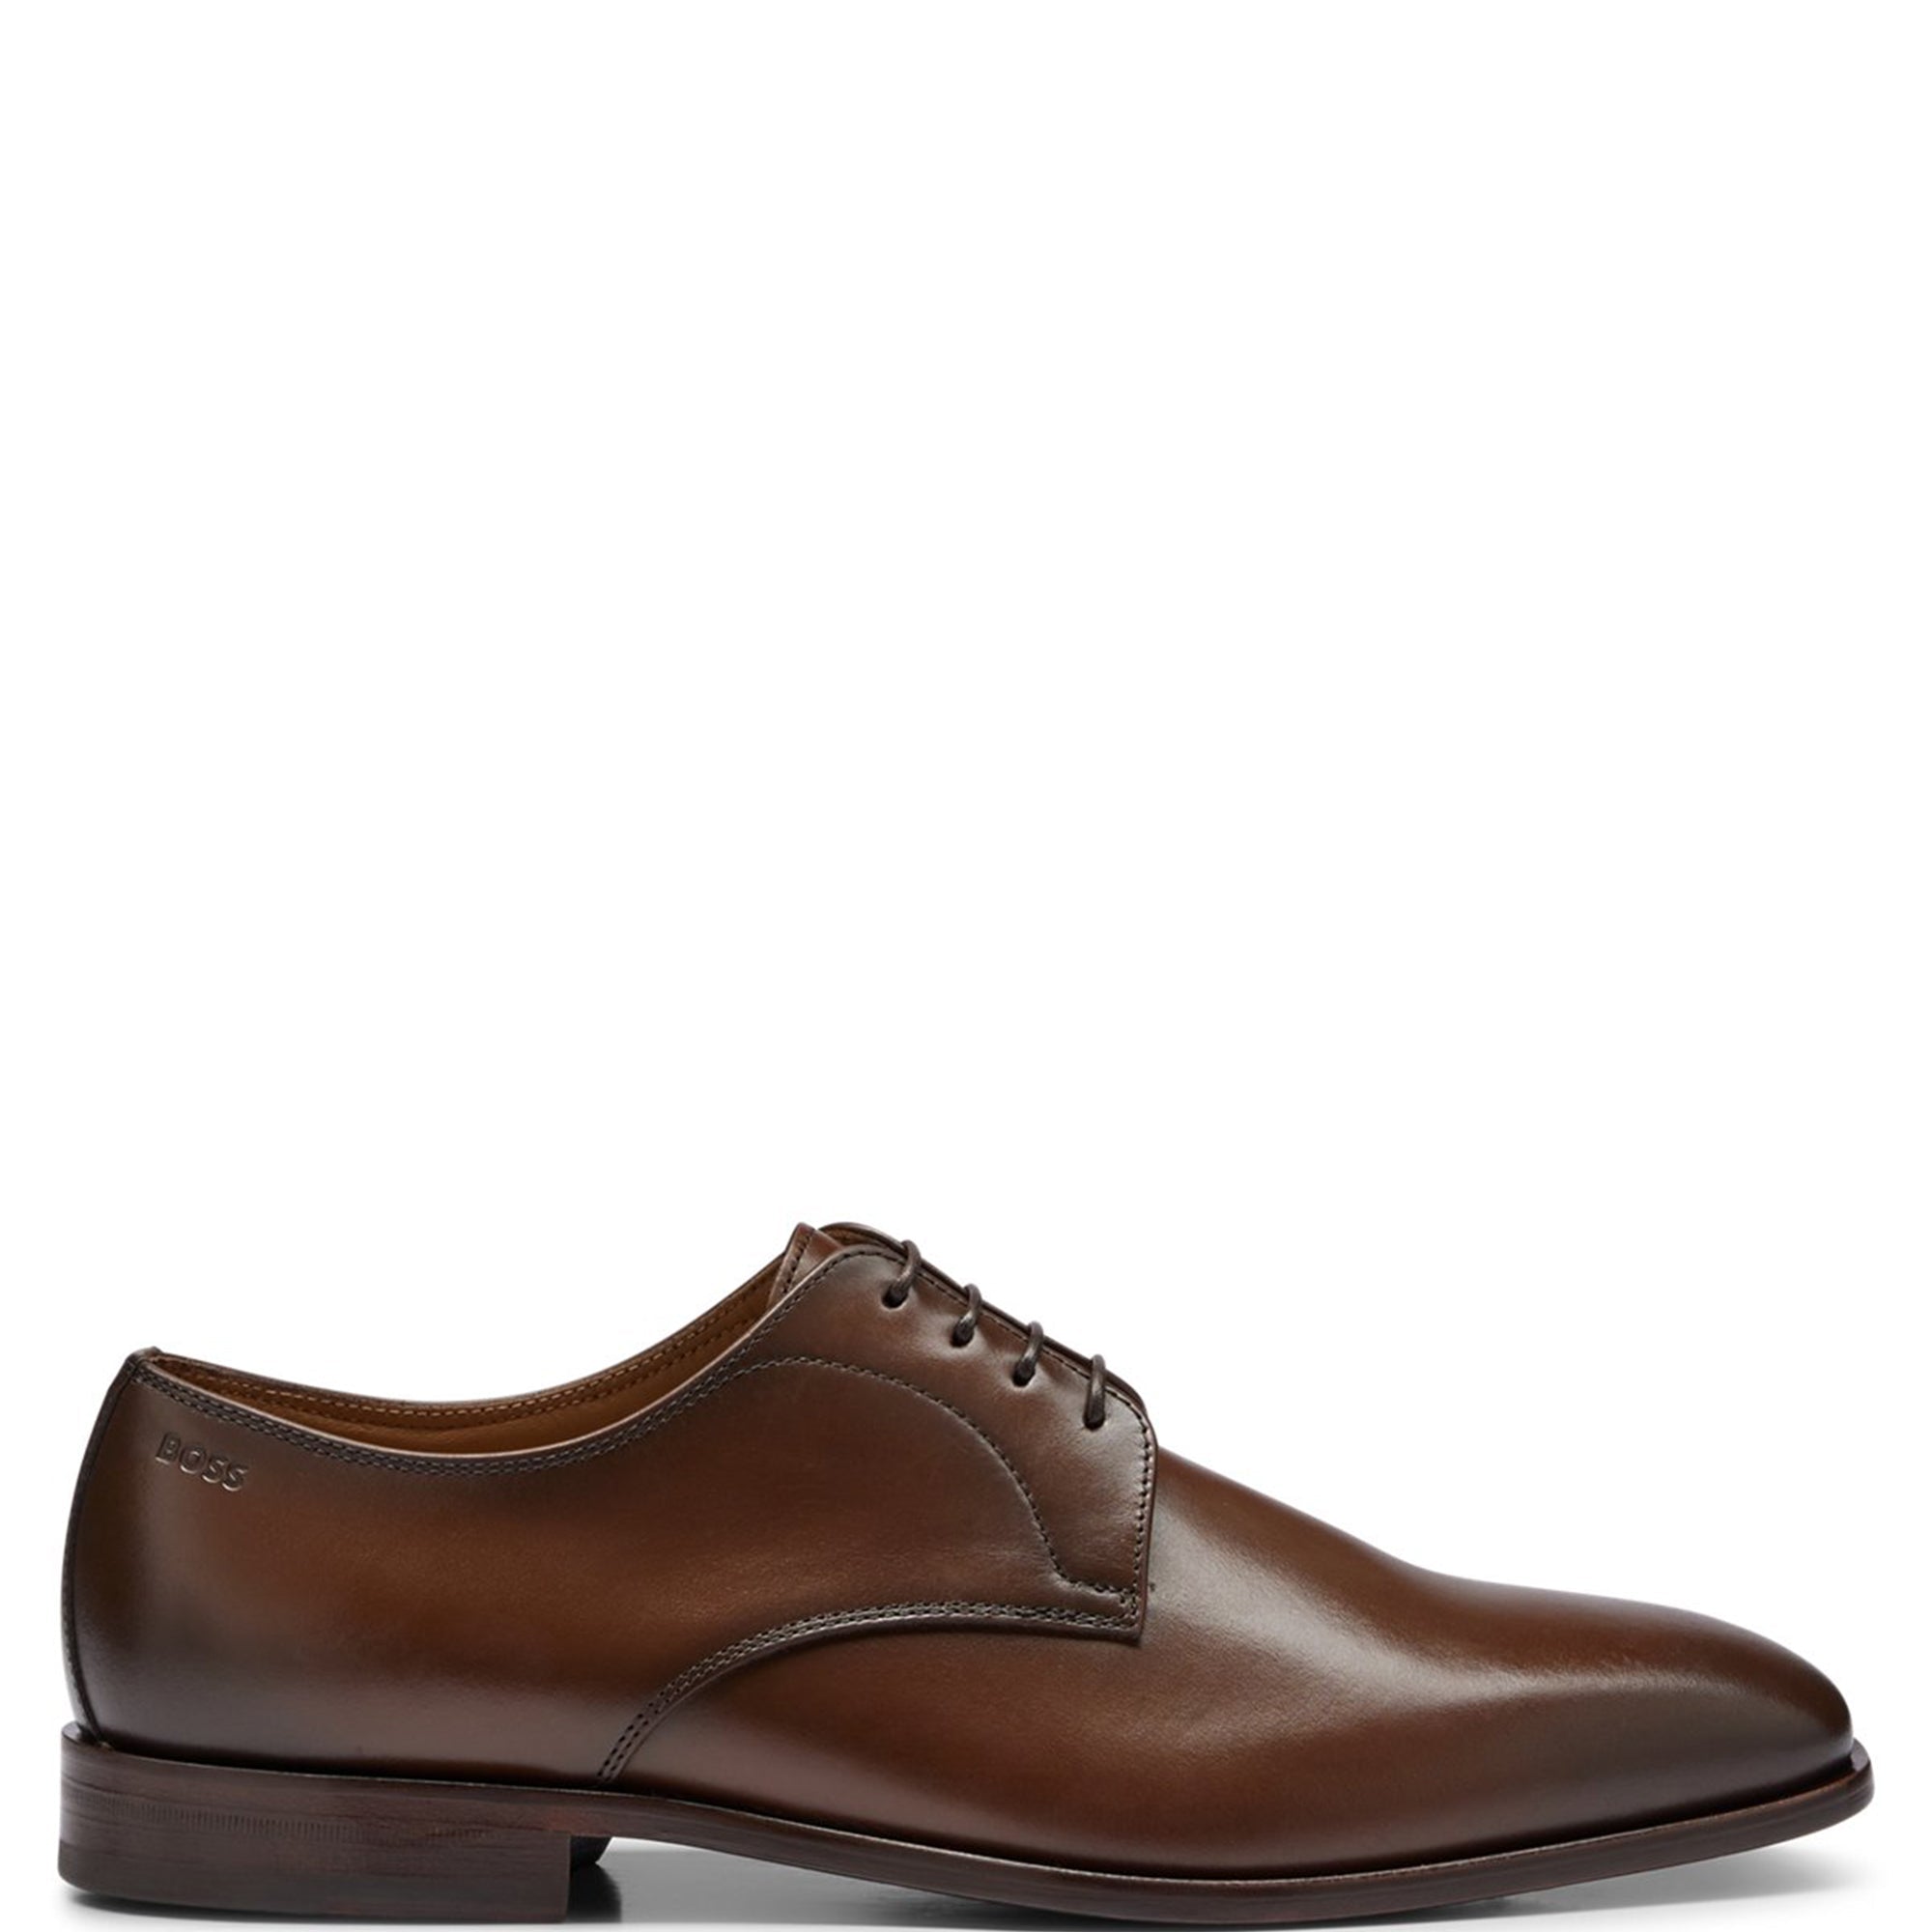 Boss Colby Derby Shoes Brown UK 6